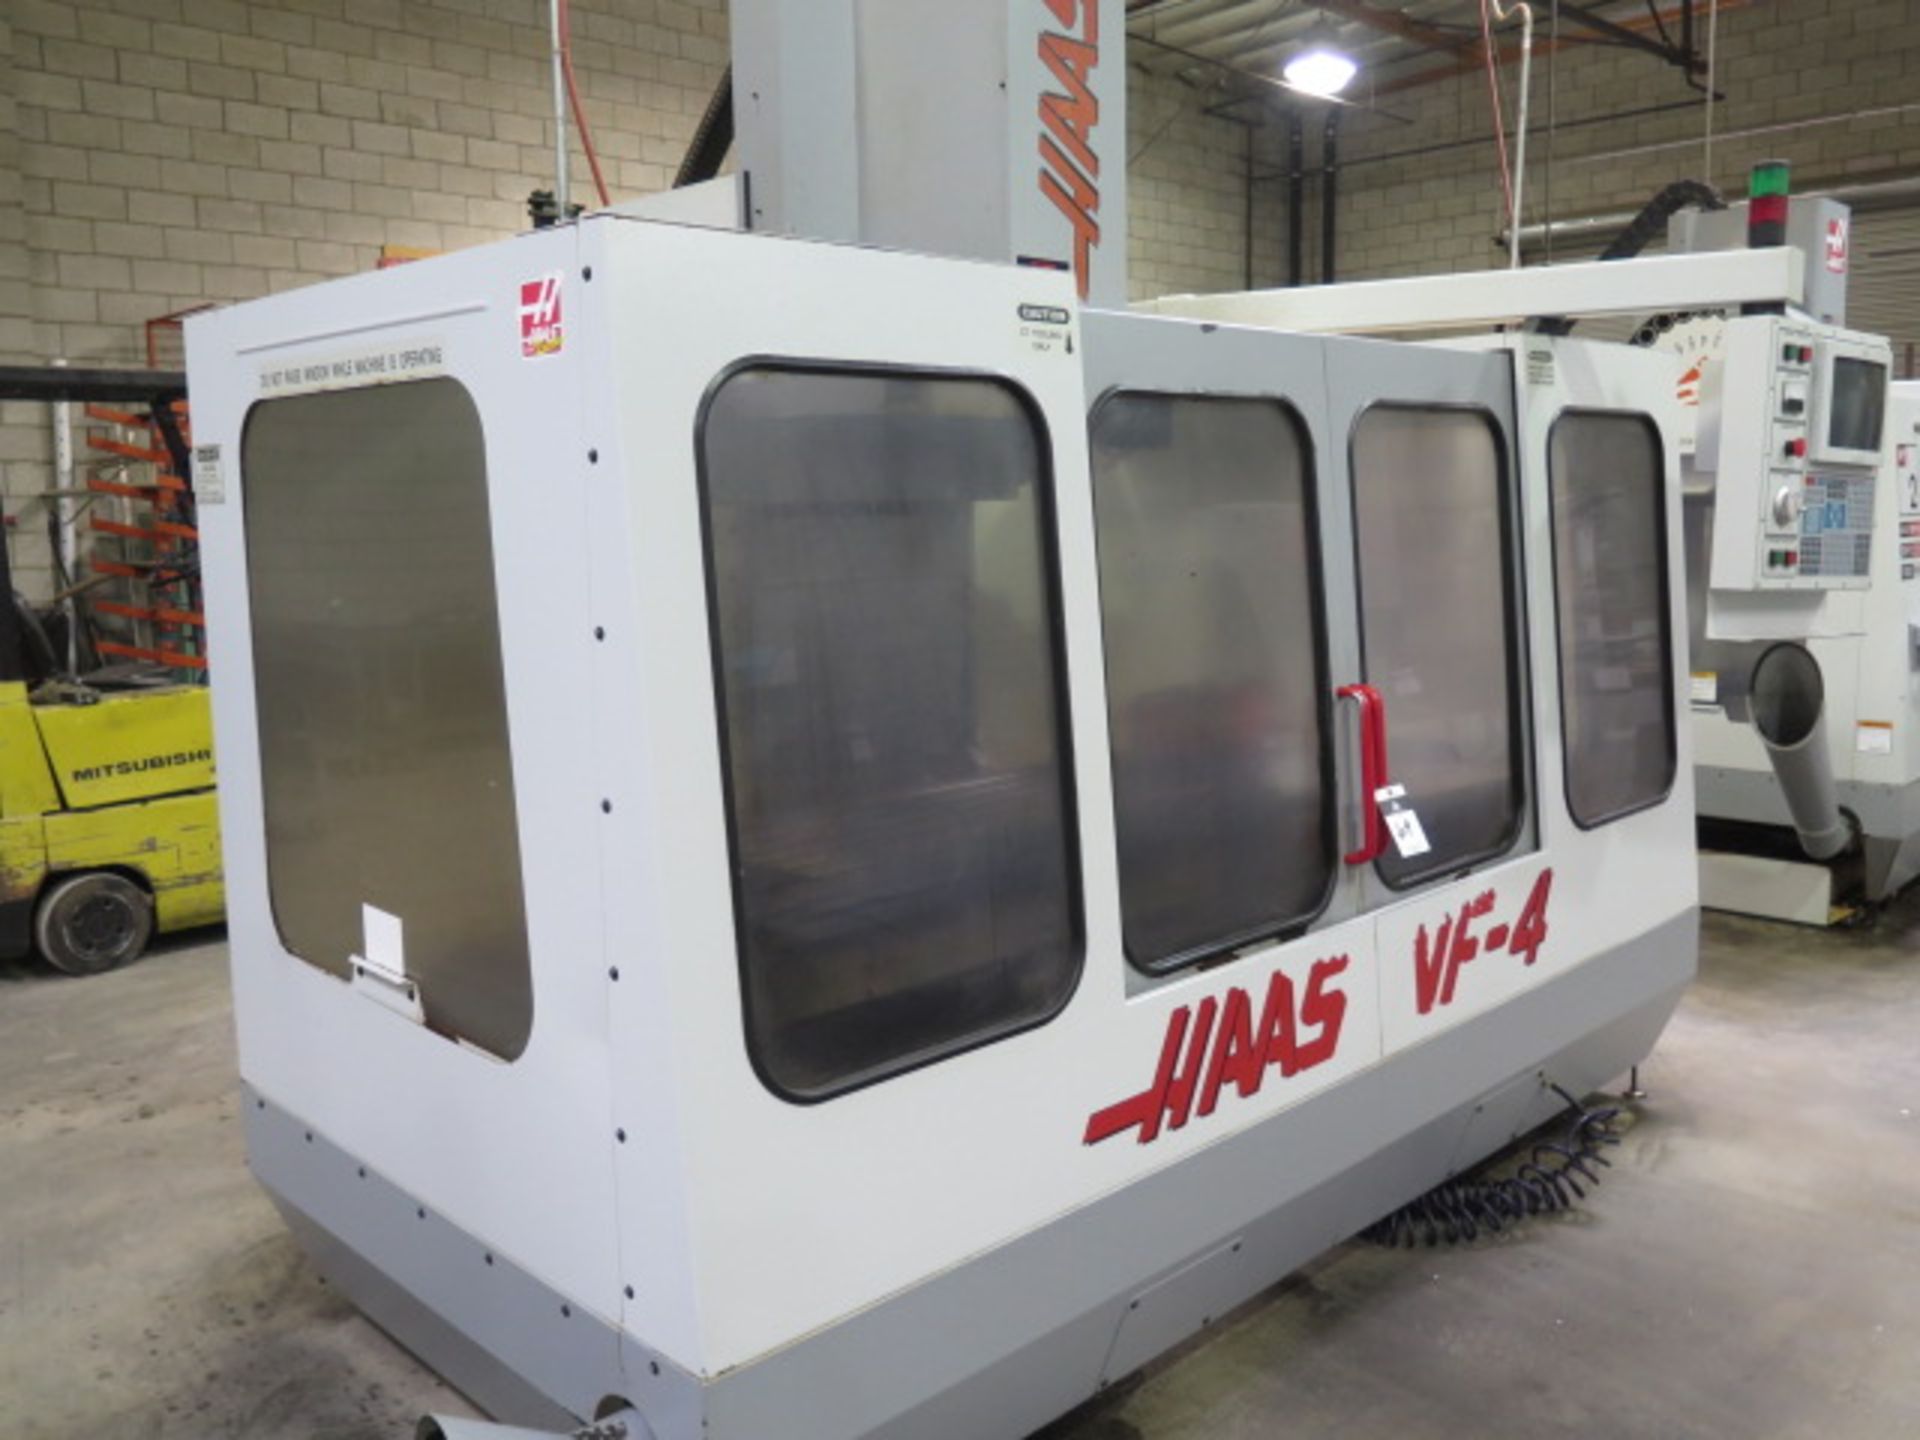 1995 Haas VF-4 4-Axis CNC Vertical Machining Center s/n 5900 w/ Haas Controls, 20-Statioon ATC, - Image 2 of 17